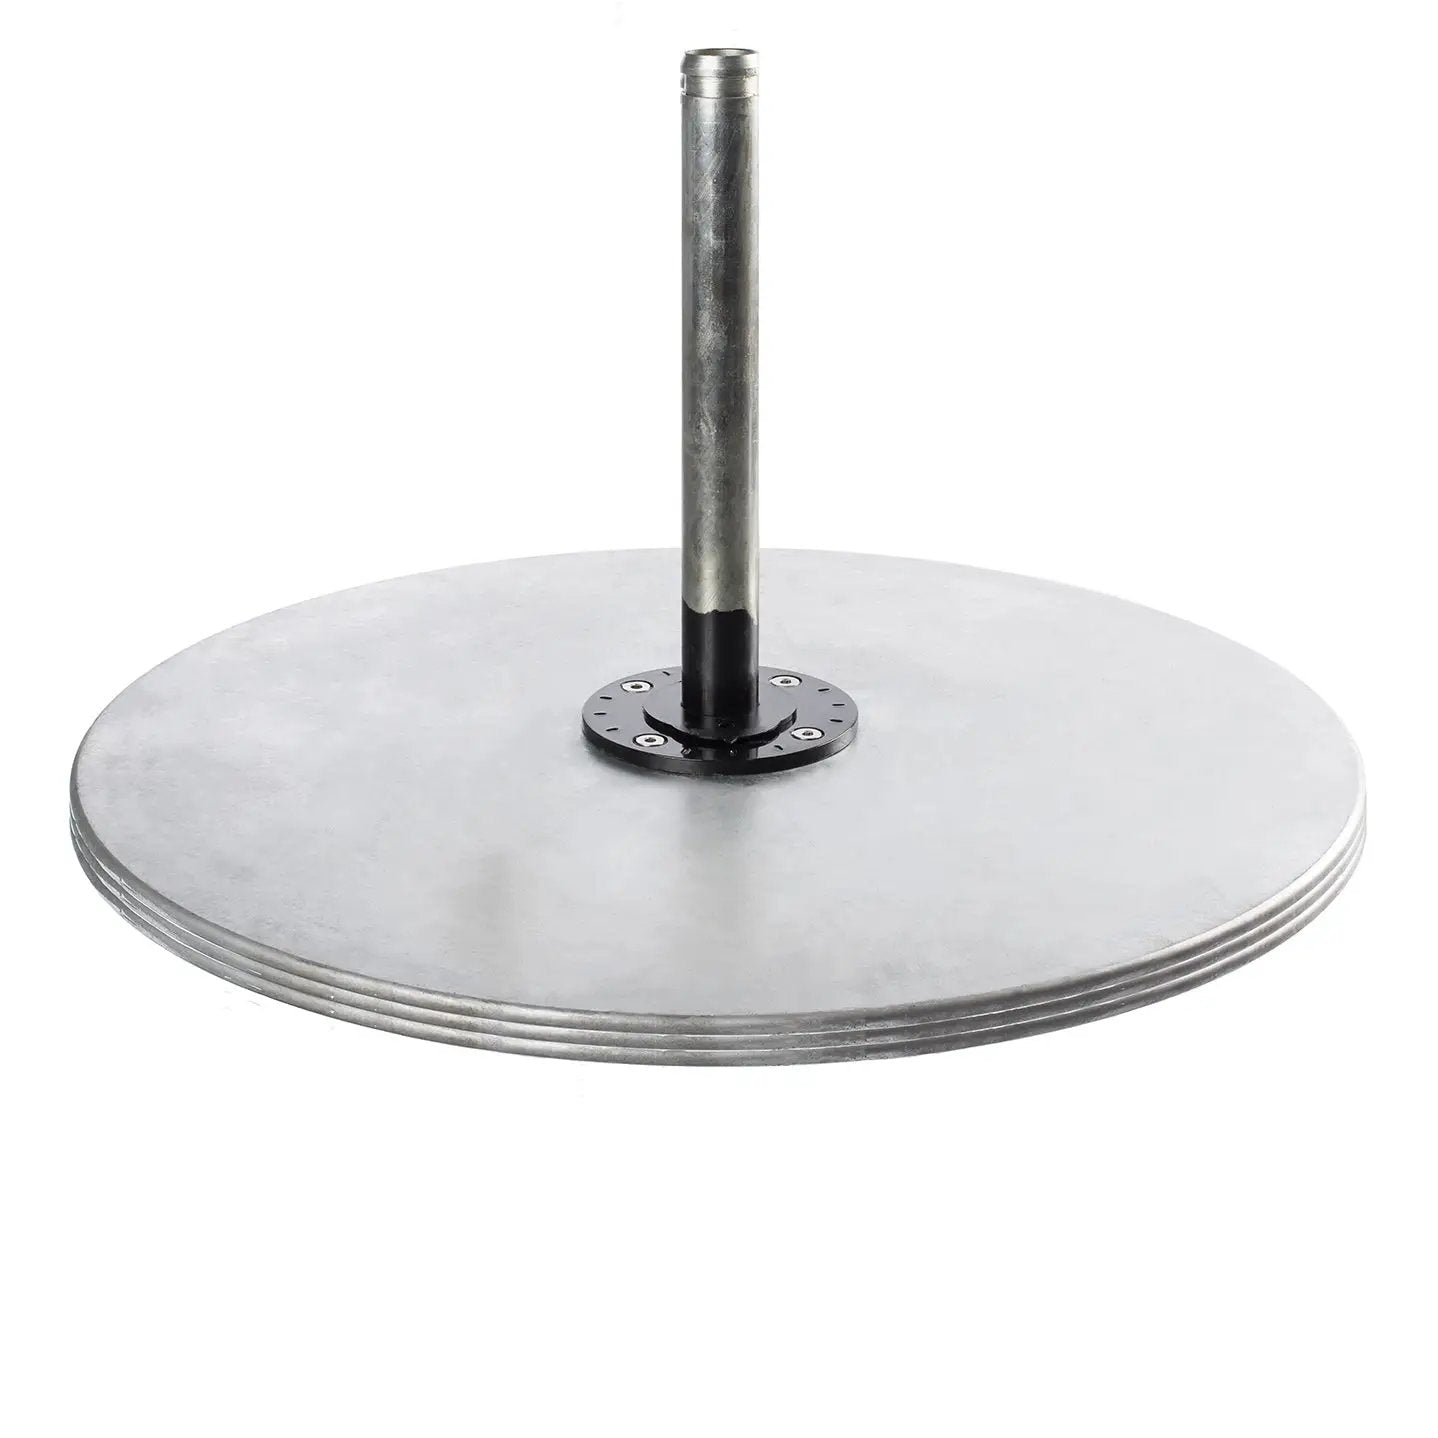 550Lb Galvanized Steel Plate Stack by Frankford Umbrella